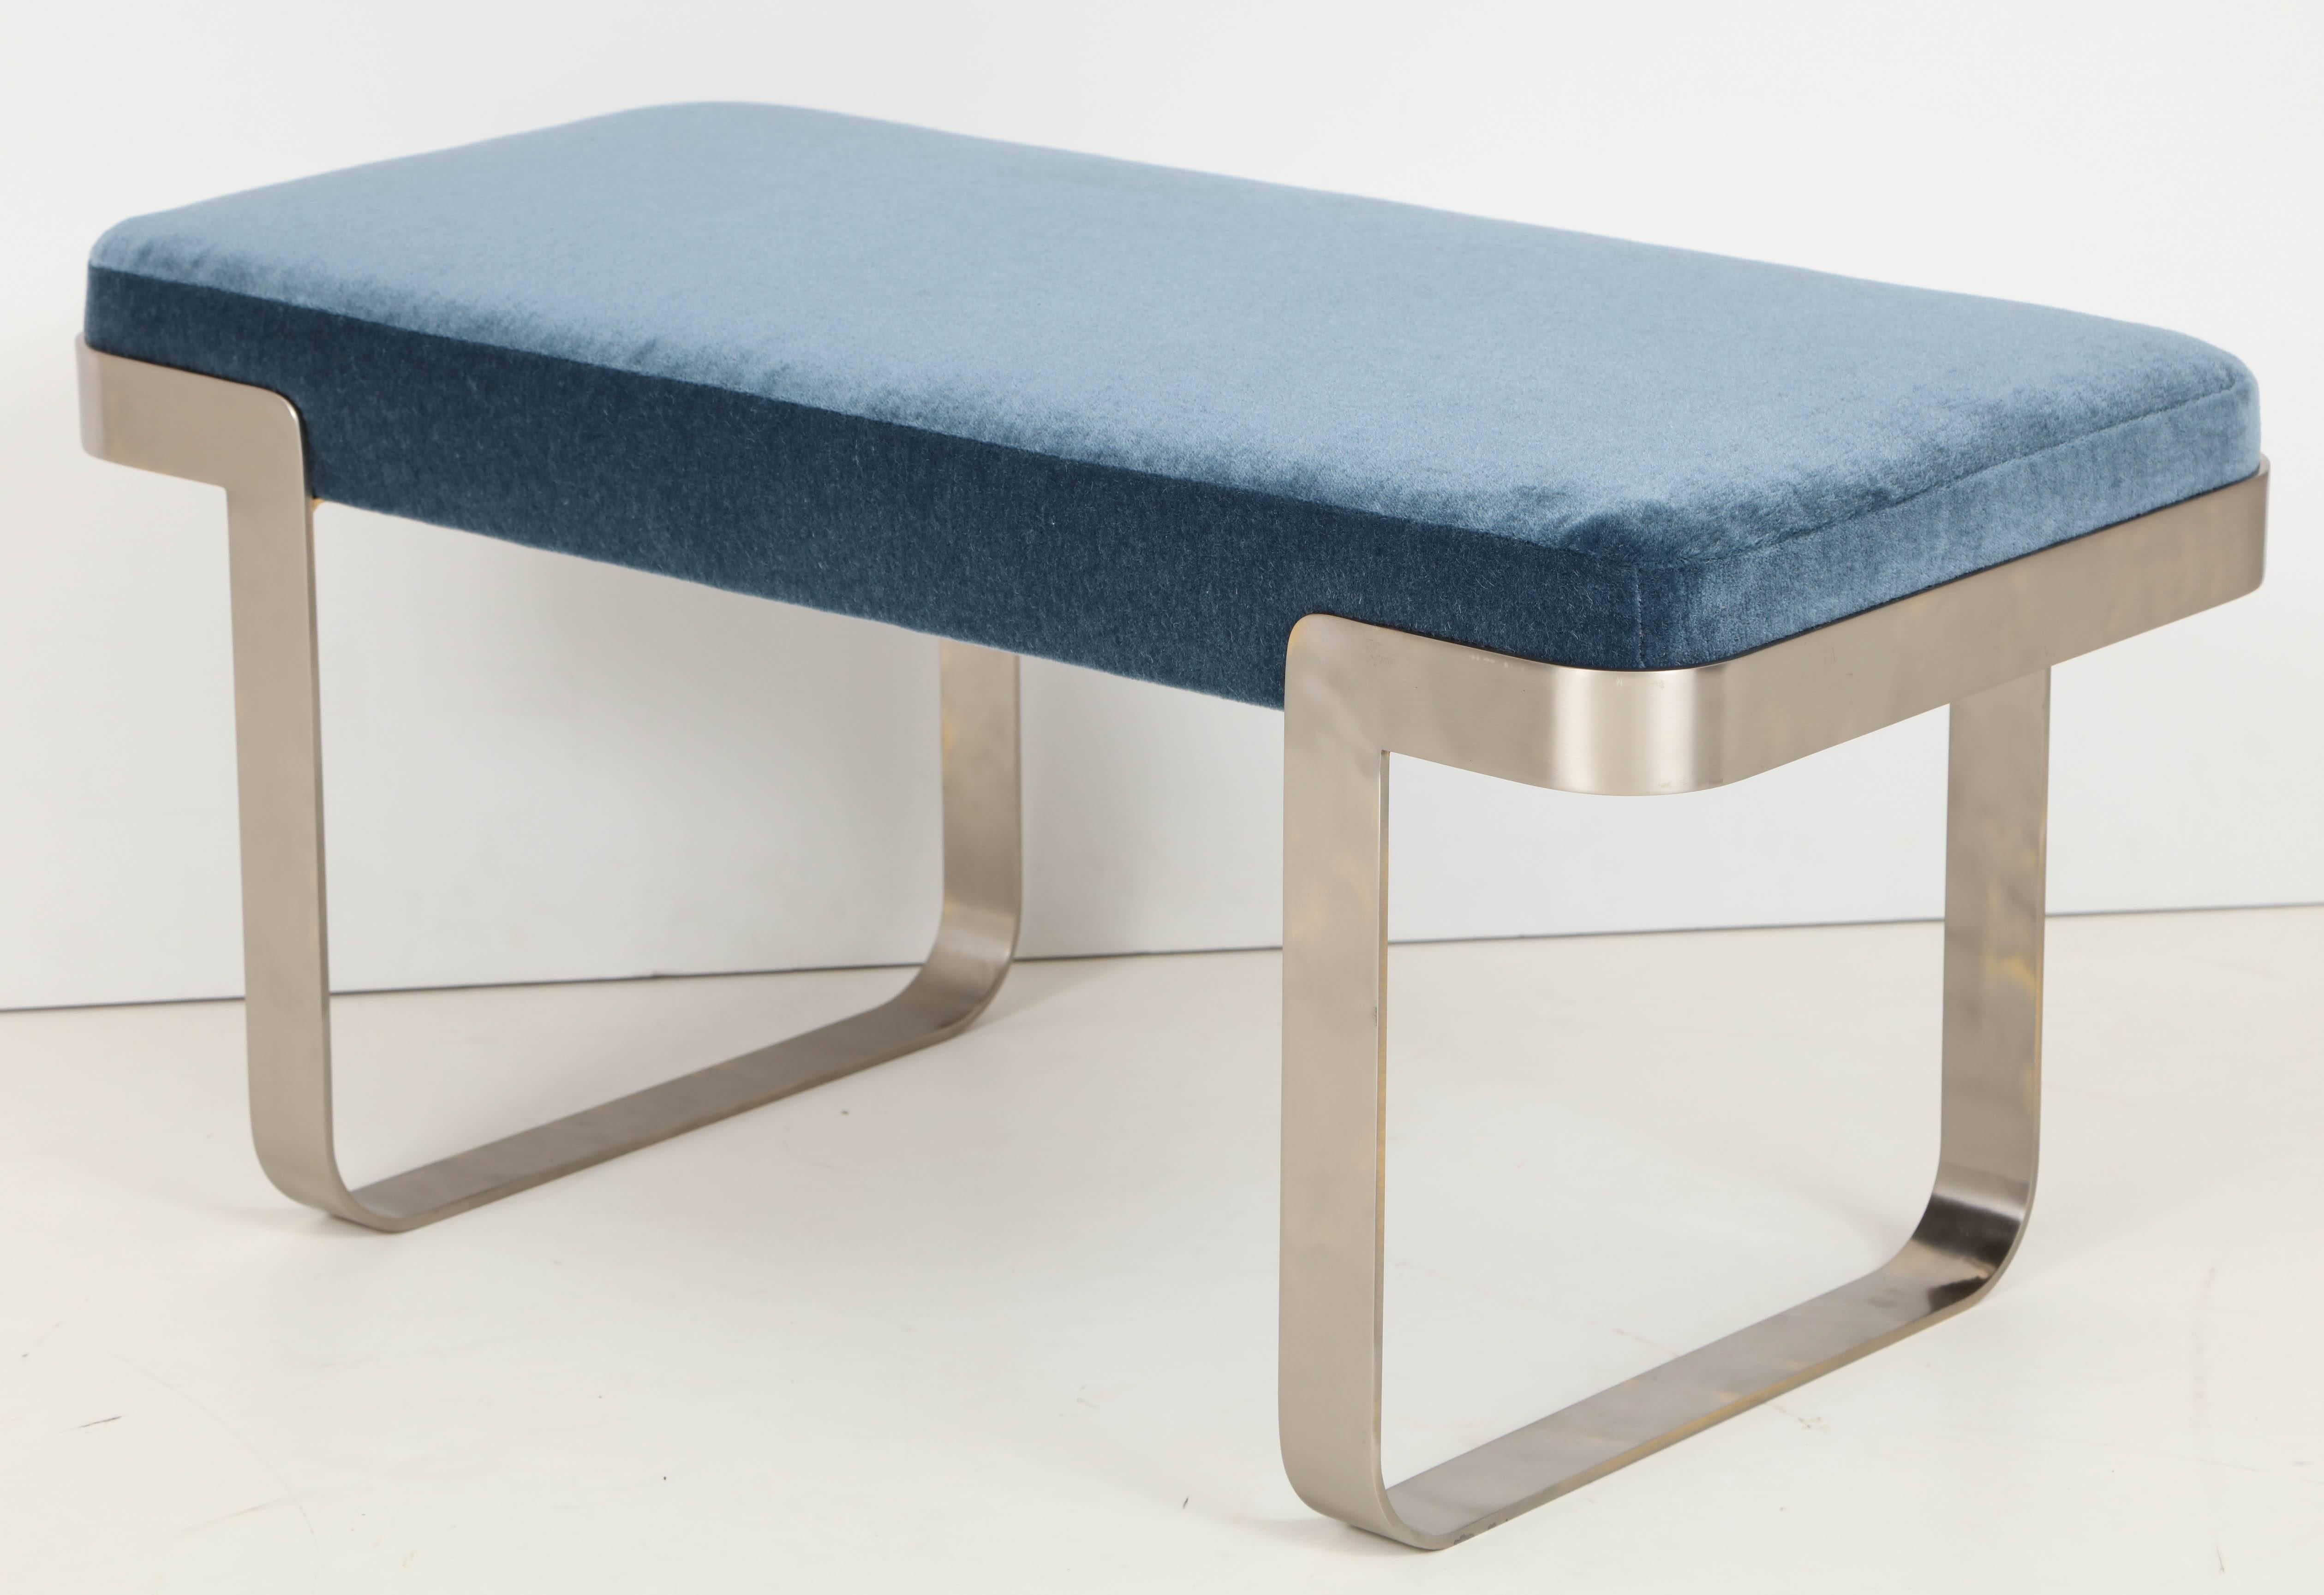 Modernist 1970s bench with heavy satin finished nickel frames which support a newly upholstered seat in a beautiful blue heavy mohair. In the style of Milo Baughman.